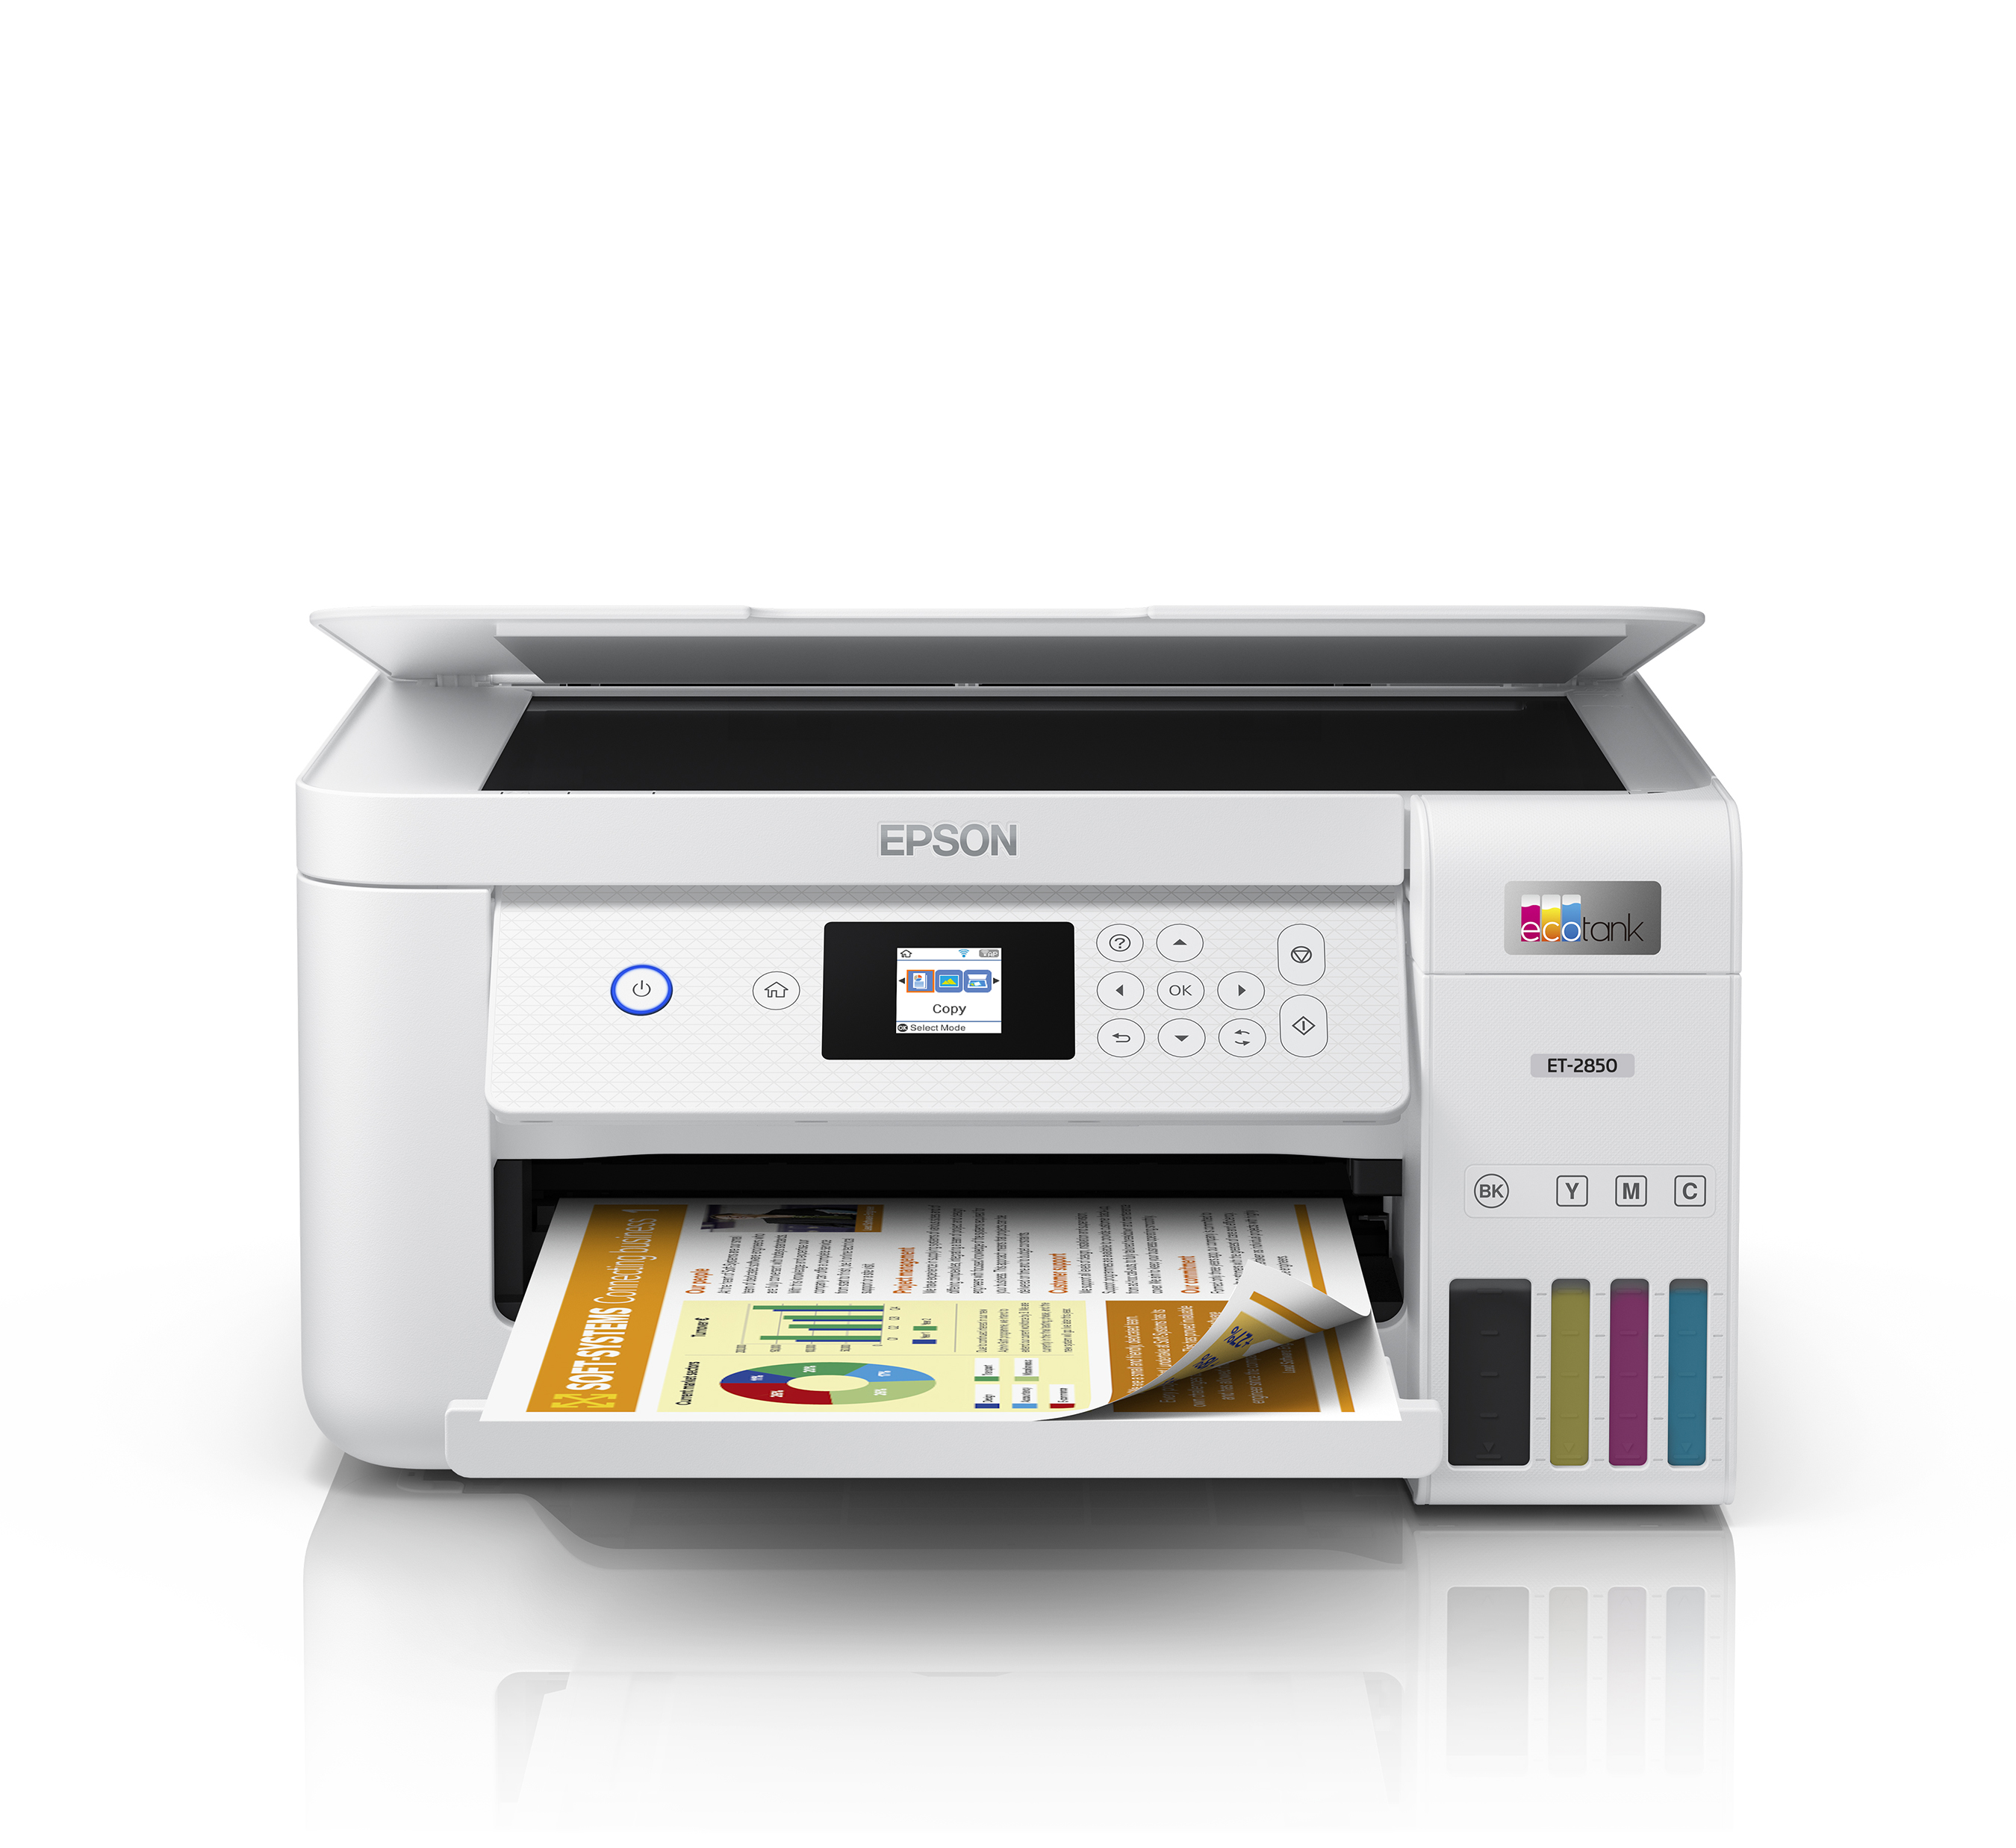 The EcoTank ET-2850 offers 2-sided printing with a built-in scanner and copier, ideal for family home printing.